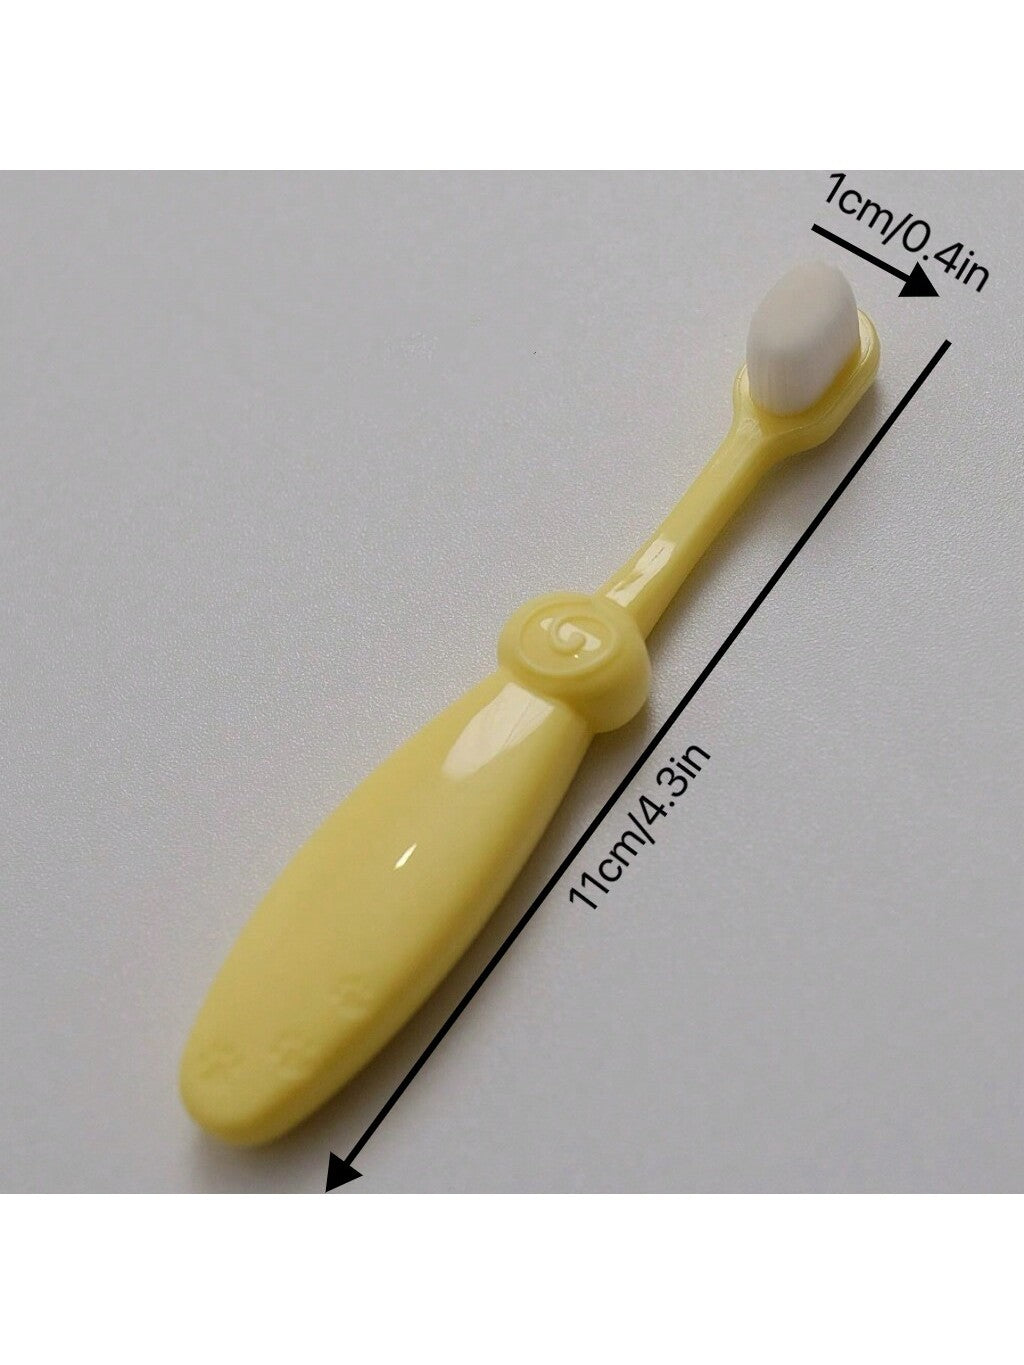 2pcs/set Pet Cat & Dog Silicone Finger Toothbrush, Bad Breath & Teeth Cleaning Tool